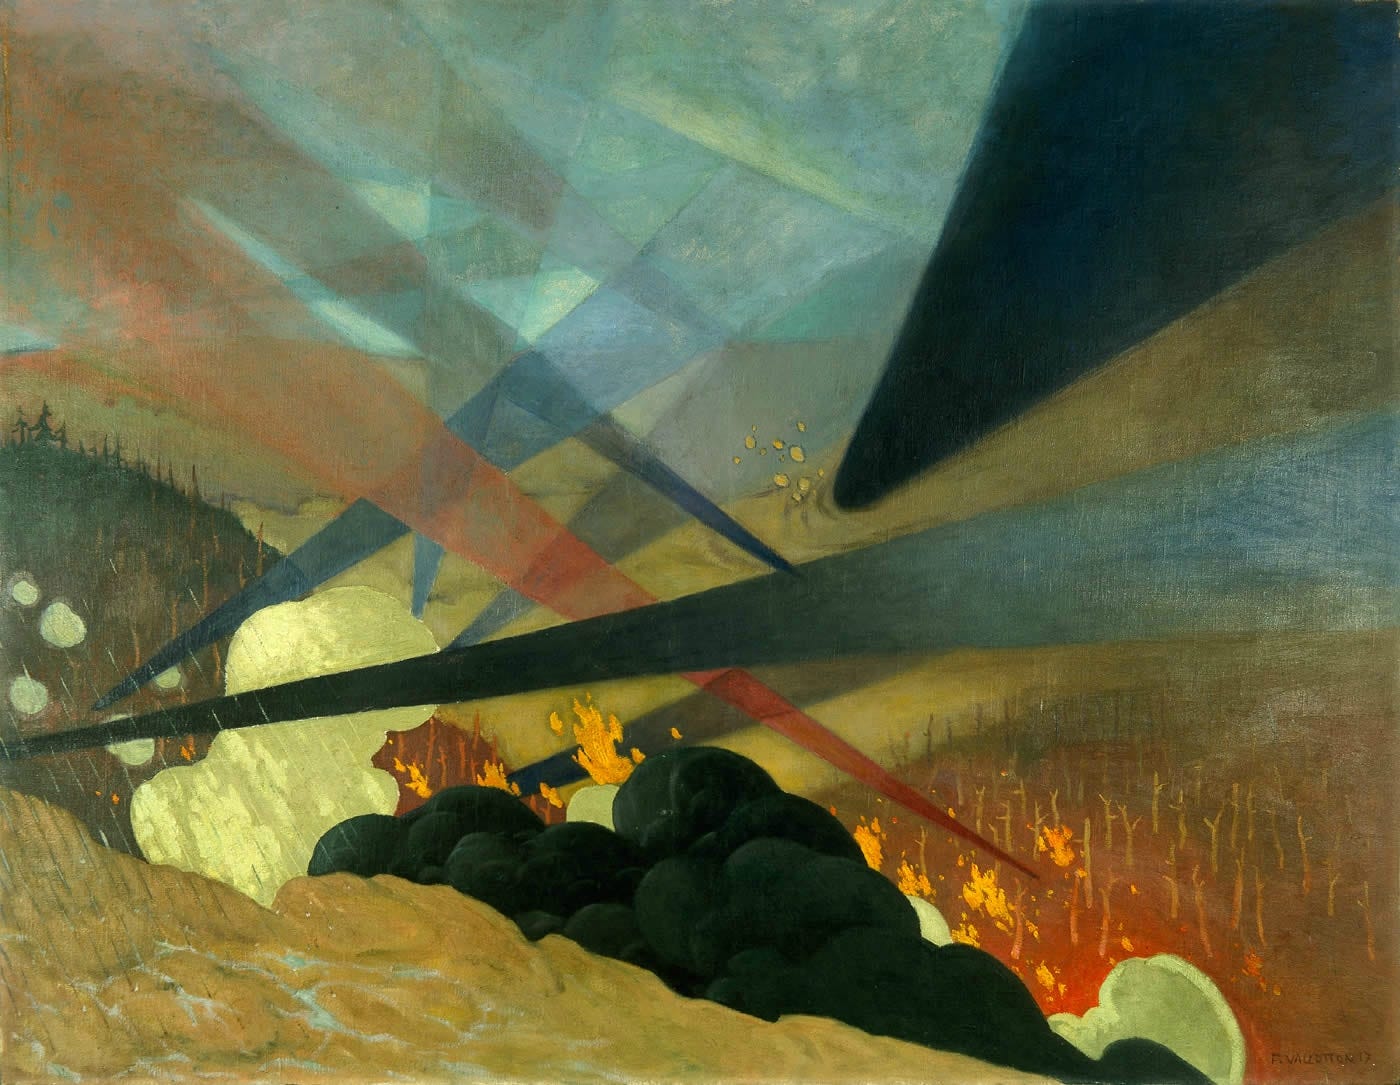 A painting of the Battle of Verdun from 1917. Smoke and burn trees existing in burning hills between beams of light.